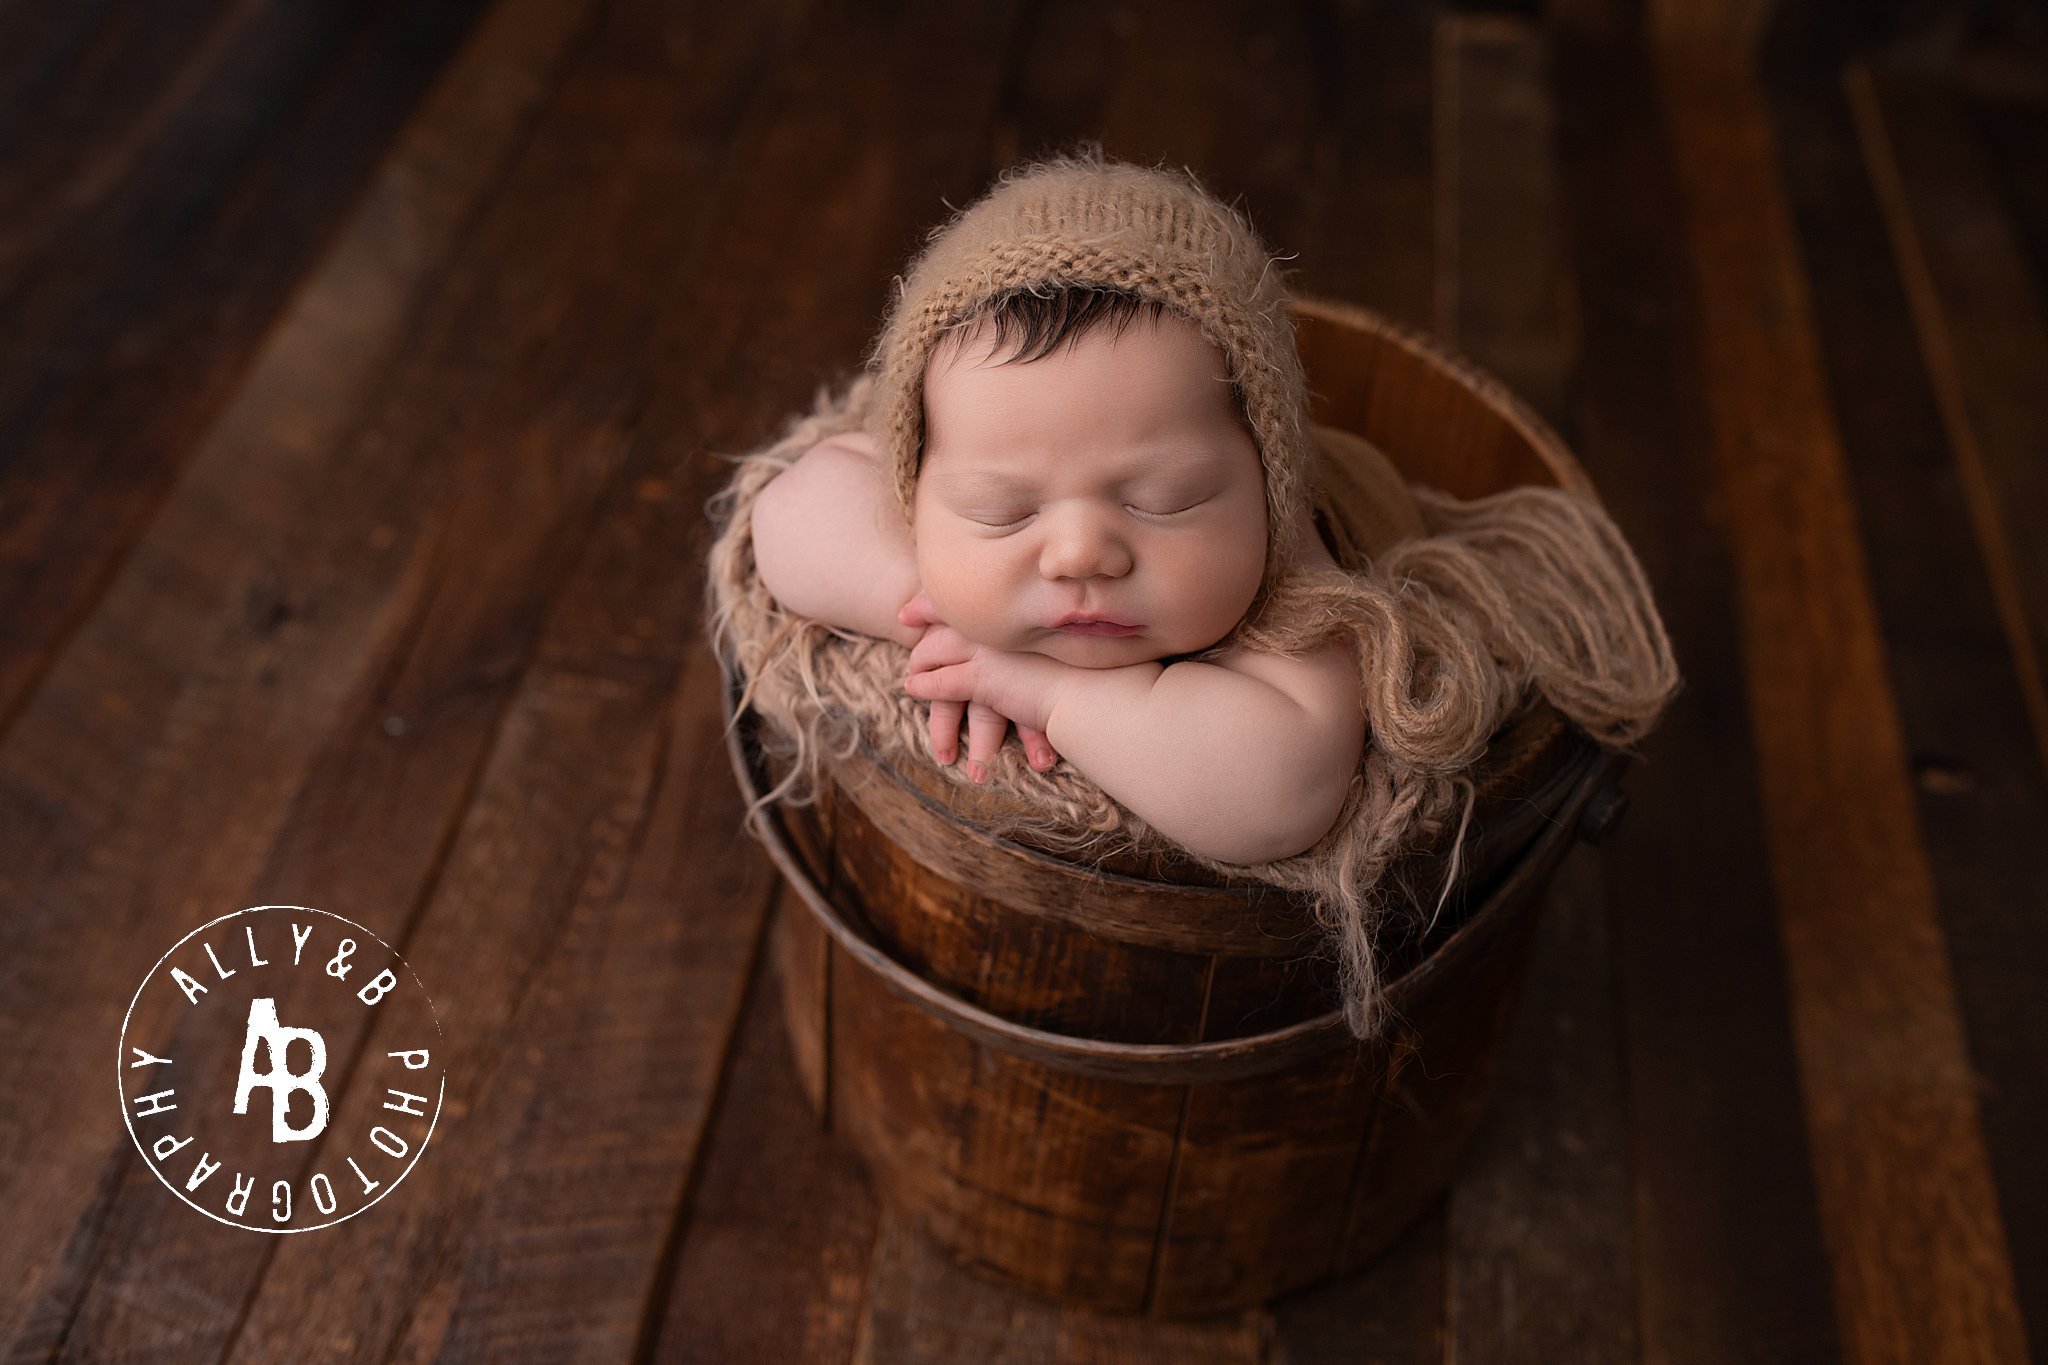 https://images.squarespace-cdn.com/content/v1/57550bf10442625aeea8c0ad/1693492639223-VY69HAMBTYTYDLG2RR8Y/posed+newborn+photography.jpg